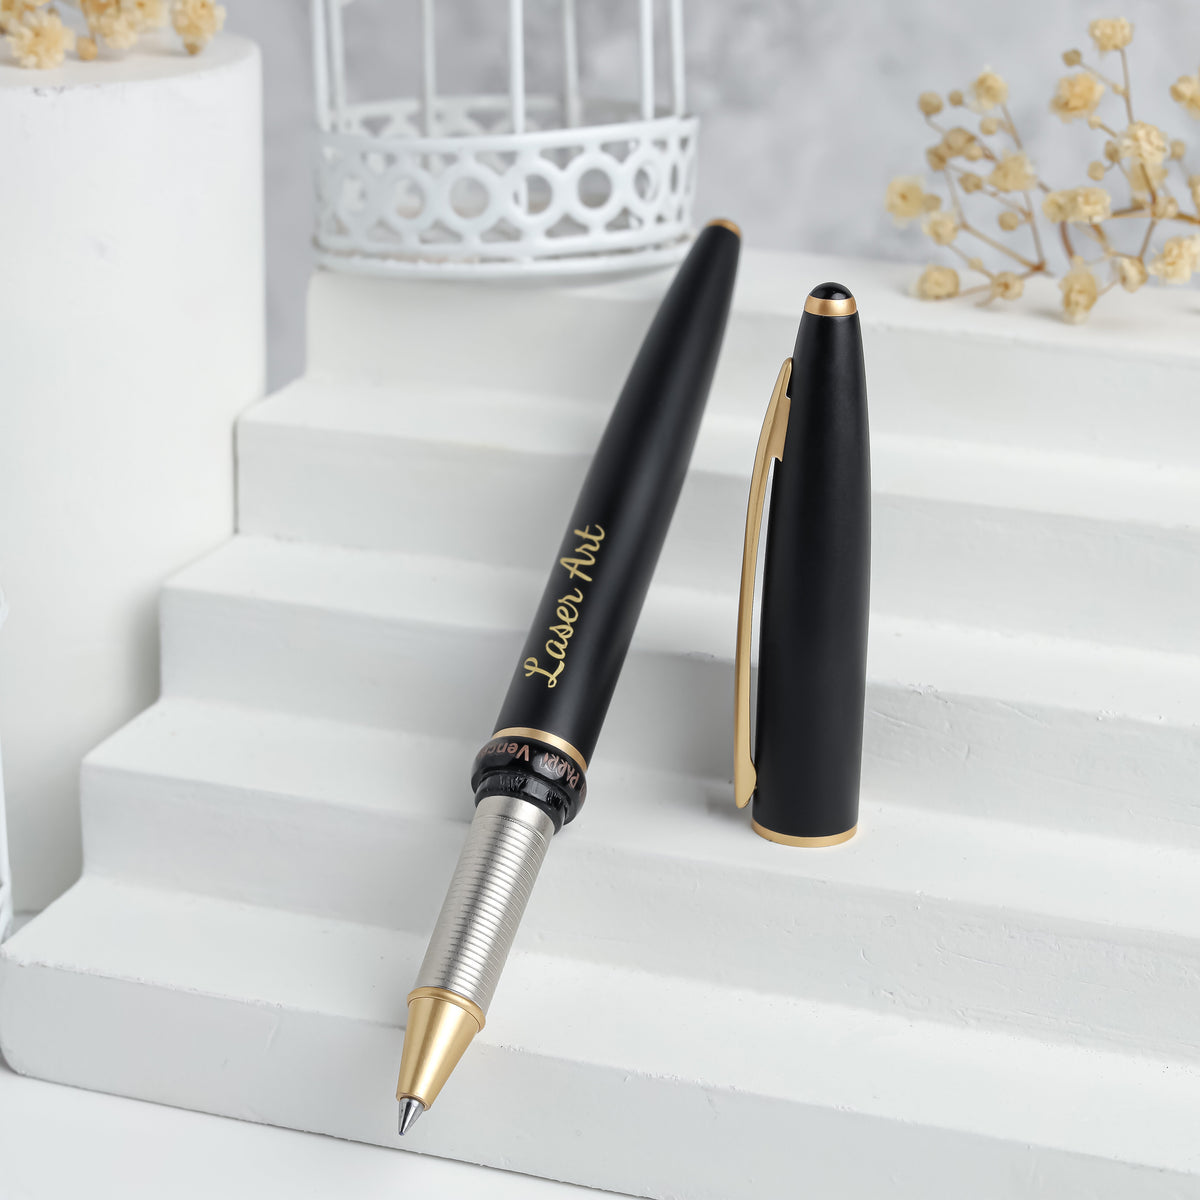 Personalized Black & Gold Executive Pen - The Perfect Gift to Mark Special Occasions